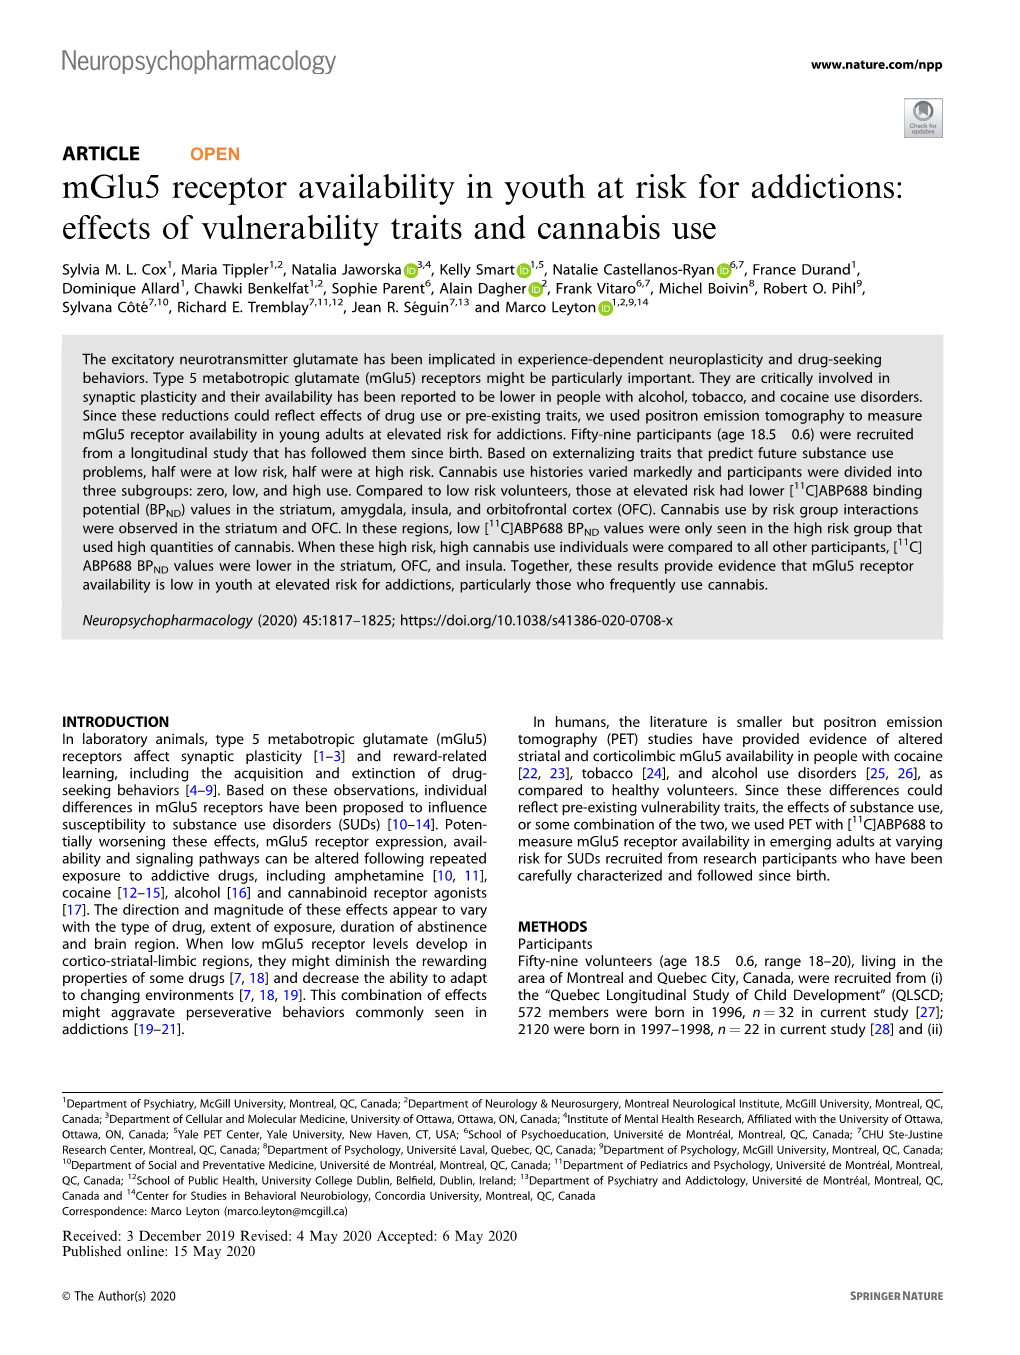 Mglu5 Receptor Availability in Youth at Risk for Addictions: Effects of Vulnerability Traits and Cannabis Use